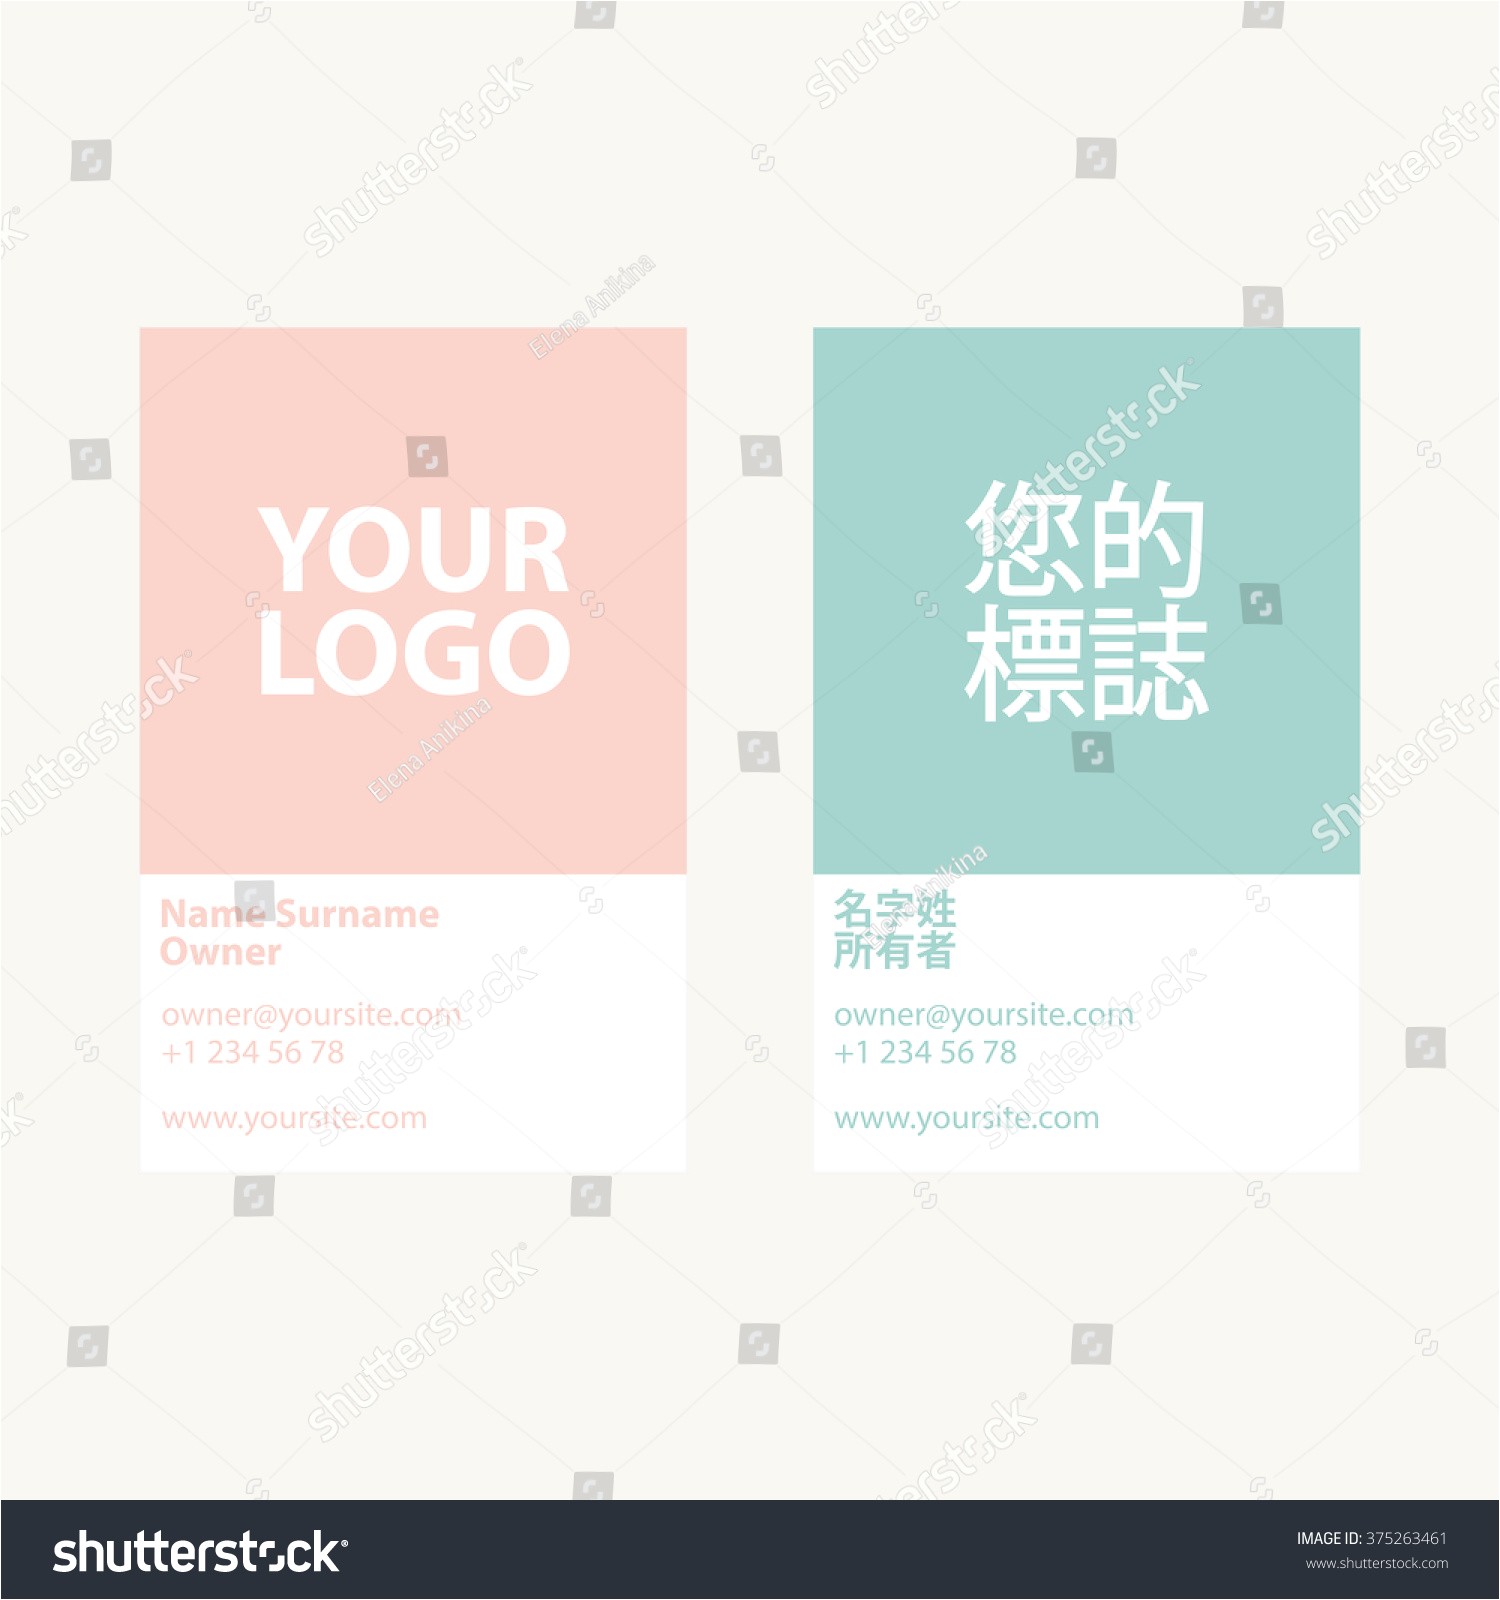 business cards printed in english and chinese